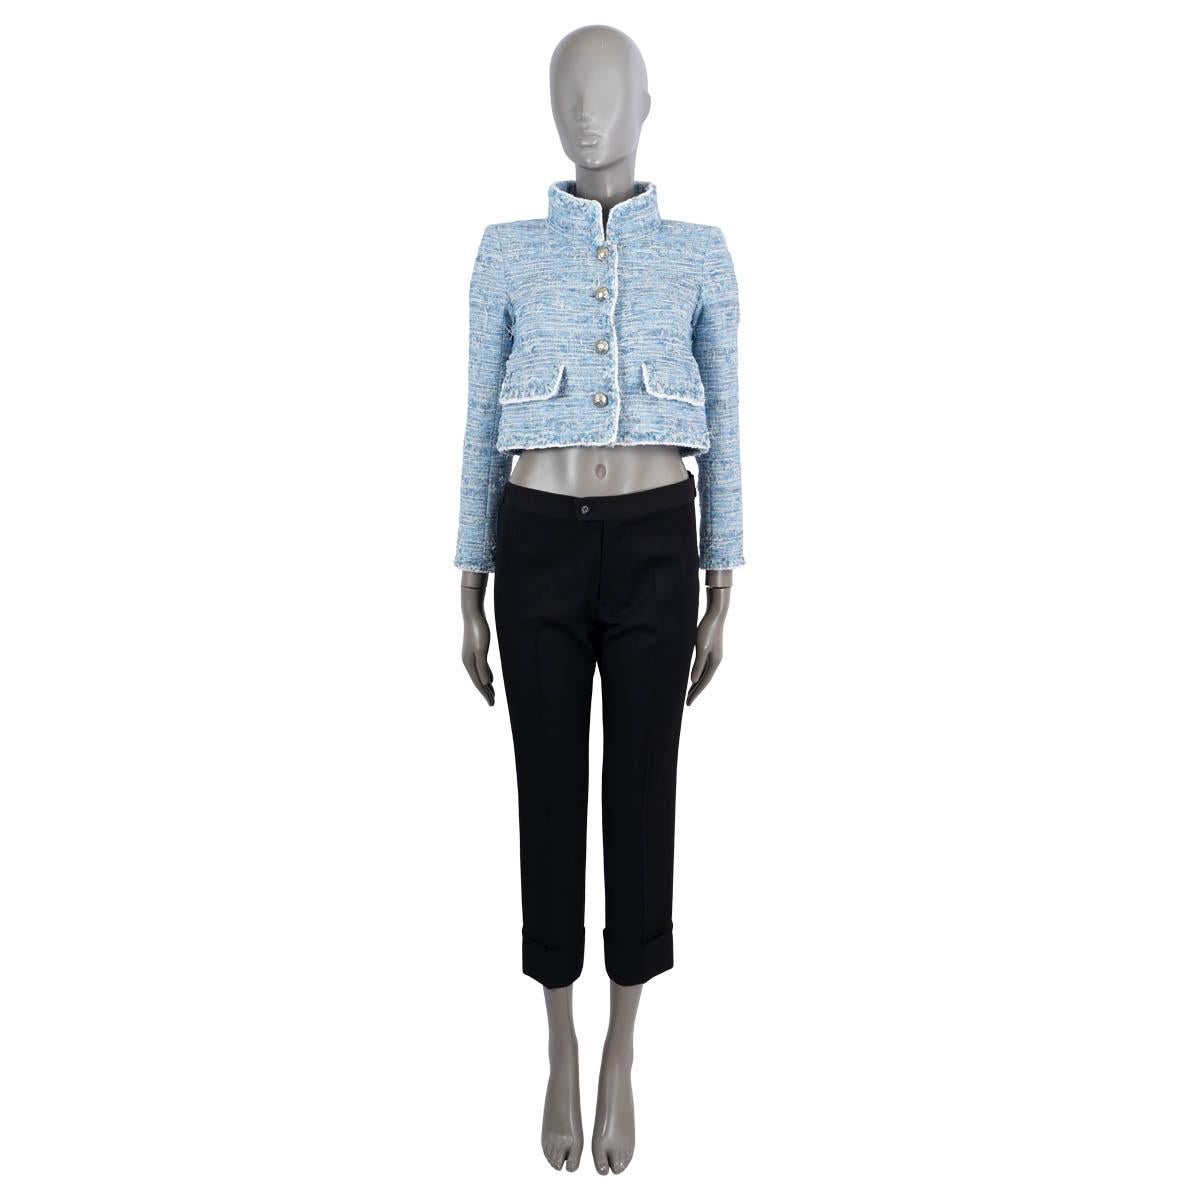 100% authentic Chanel cropped tweed jacket in sky blue and white polyester (78%), cotton (20%) and nylon (4%). Features a high stand-up collar and two flap pockets. Closes with gold-tone buttons on the front and is lined in silk (100%). Has been